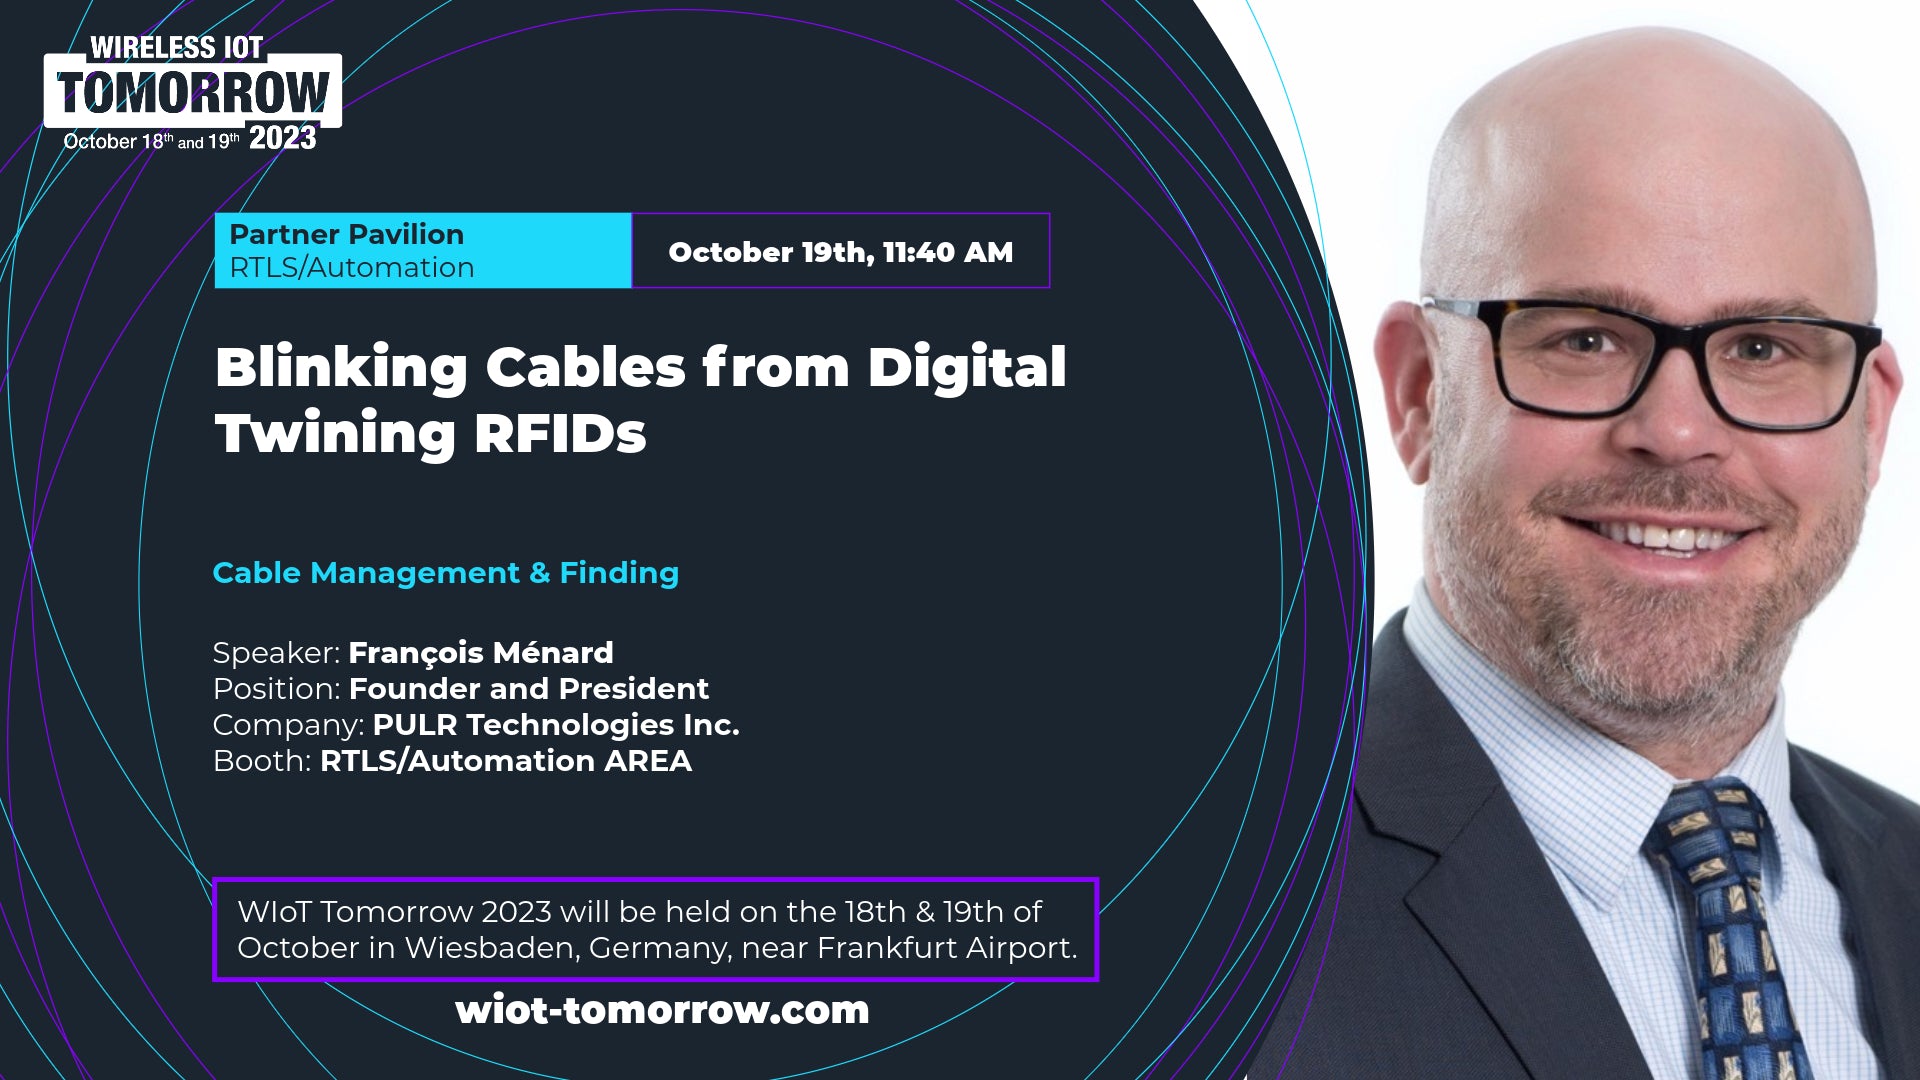 Join us in Wiesbaden to hear our talk on Blinking Cables from Digital Twinning RFID's @ 11:40 AM on October 19, 2023